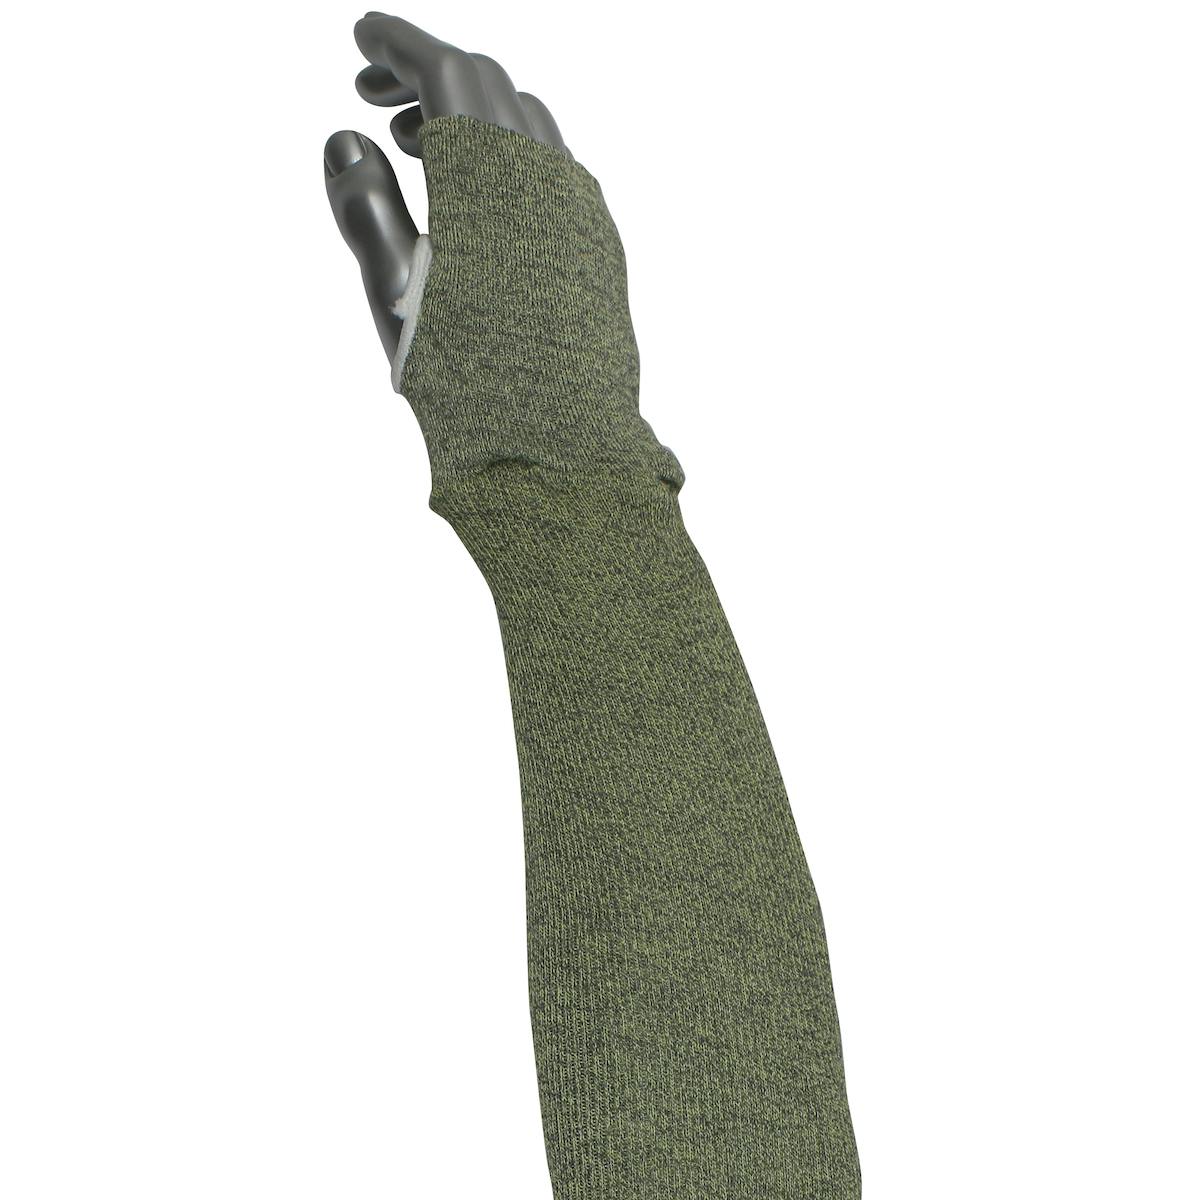 Kut Gard® Single-Ply ATA® Hide-Away™ Blended Sleeve with Sewn-On Knit Wrist and Thumb Hole (MS2X1HA-T)